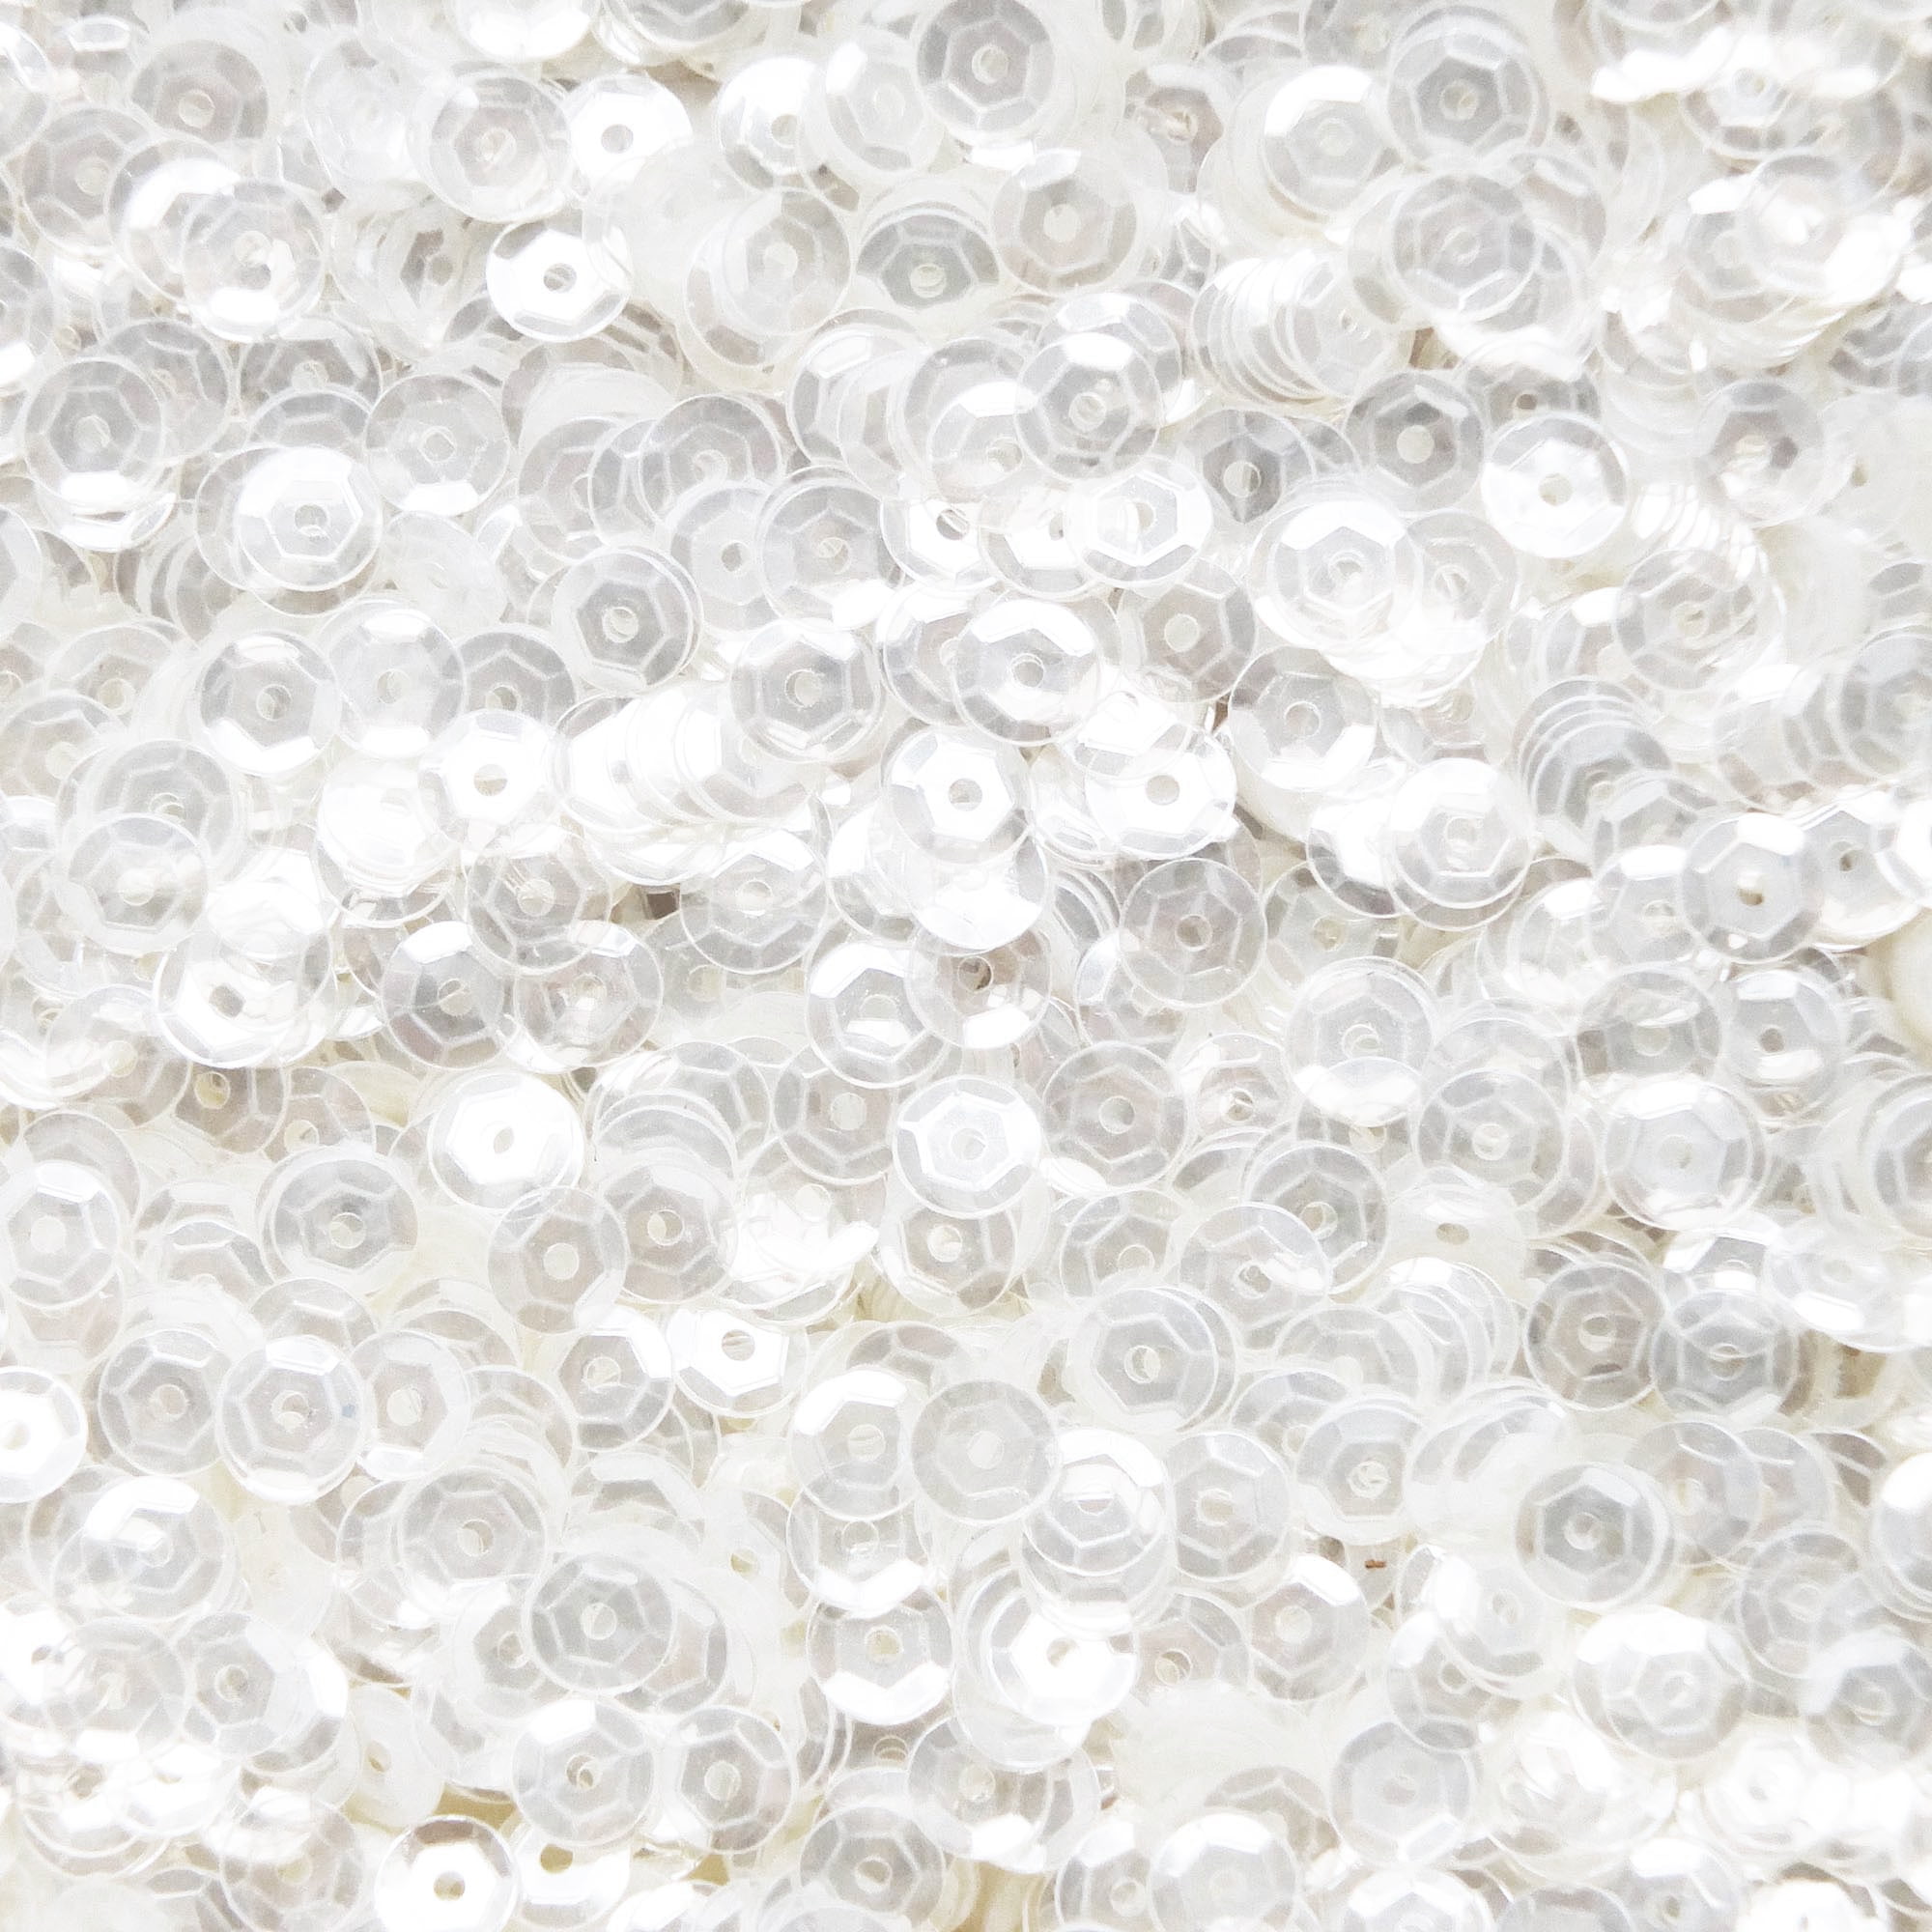 Craft Sequins - 5mm Cupped Sequins